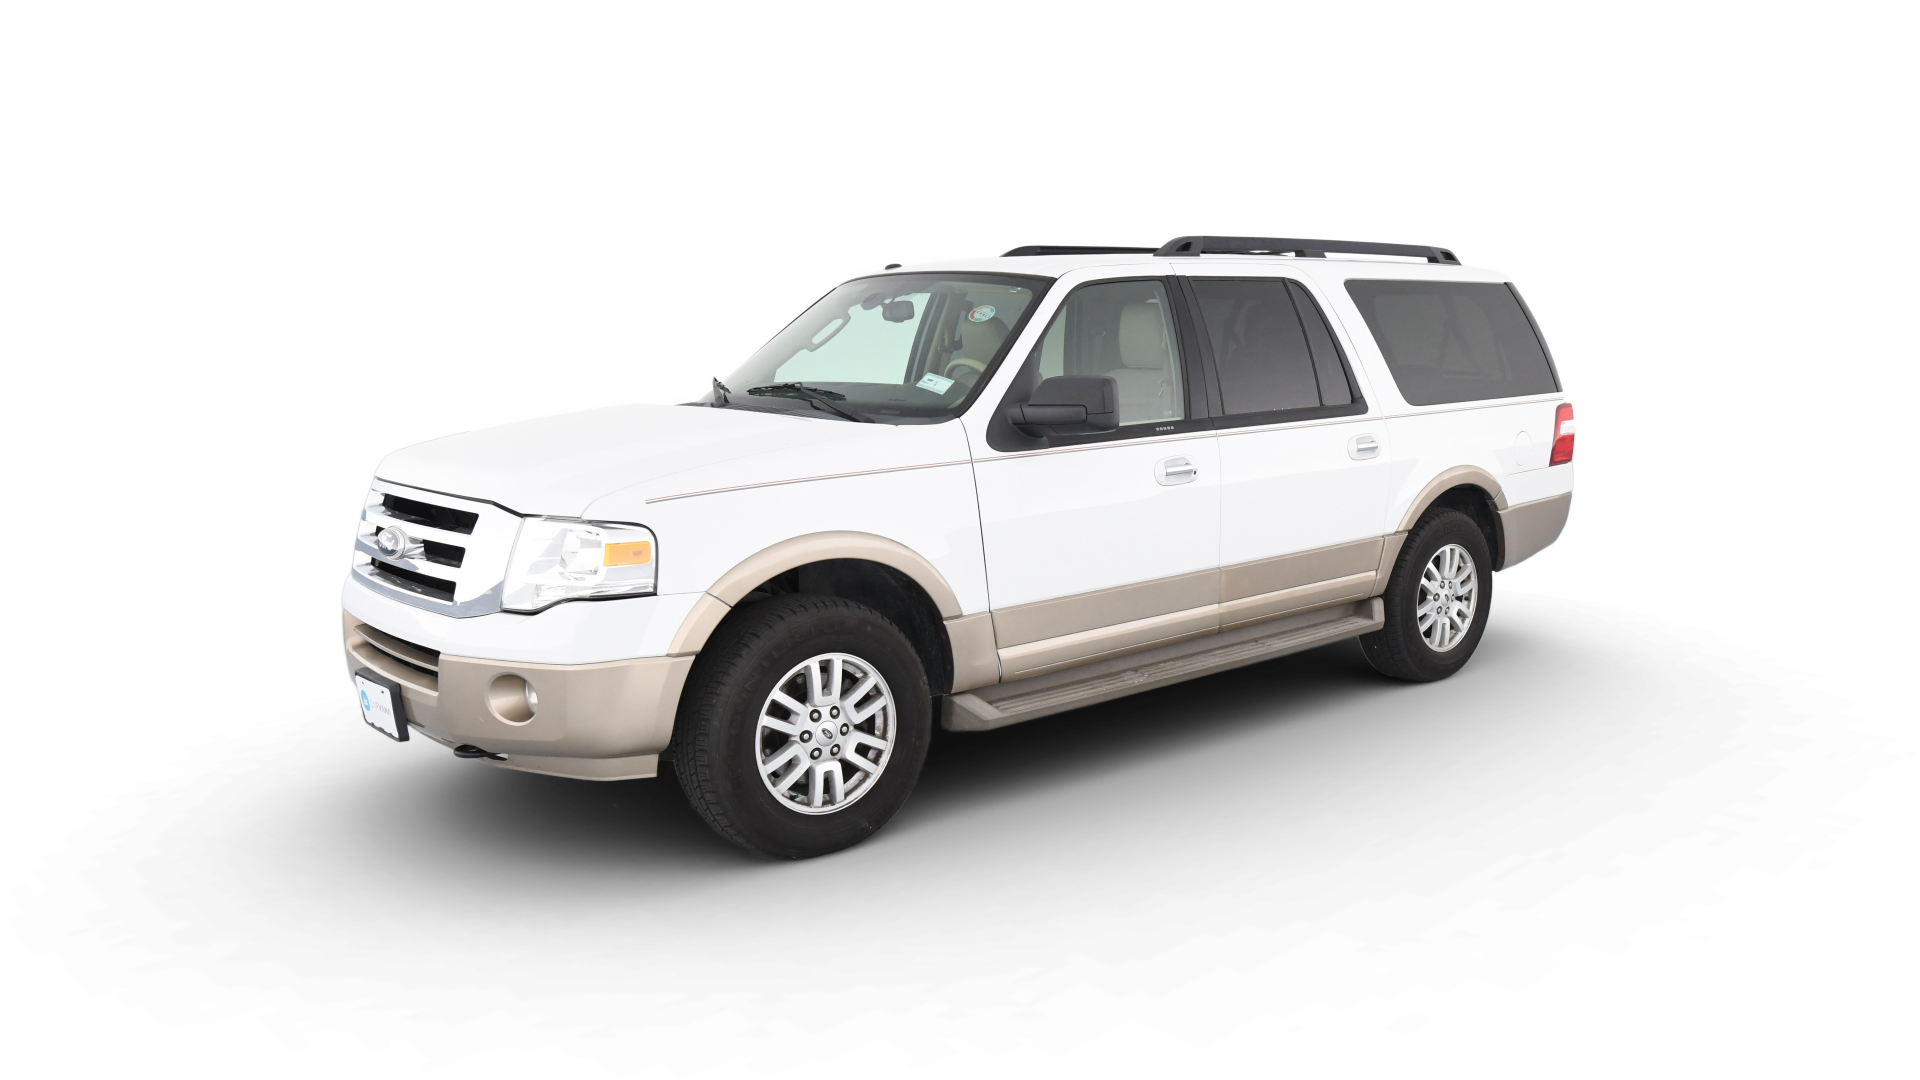 Used Ford Expedition EL For Sale Online | Carvana